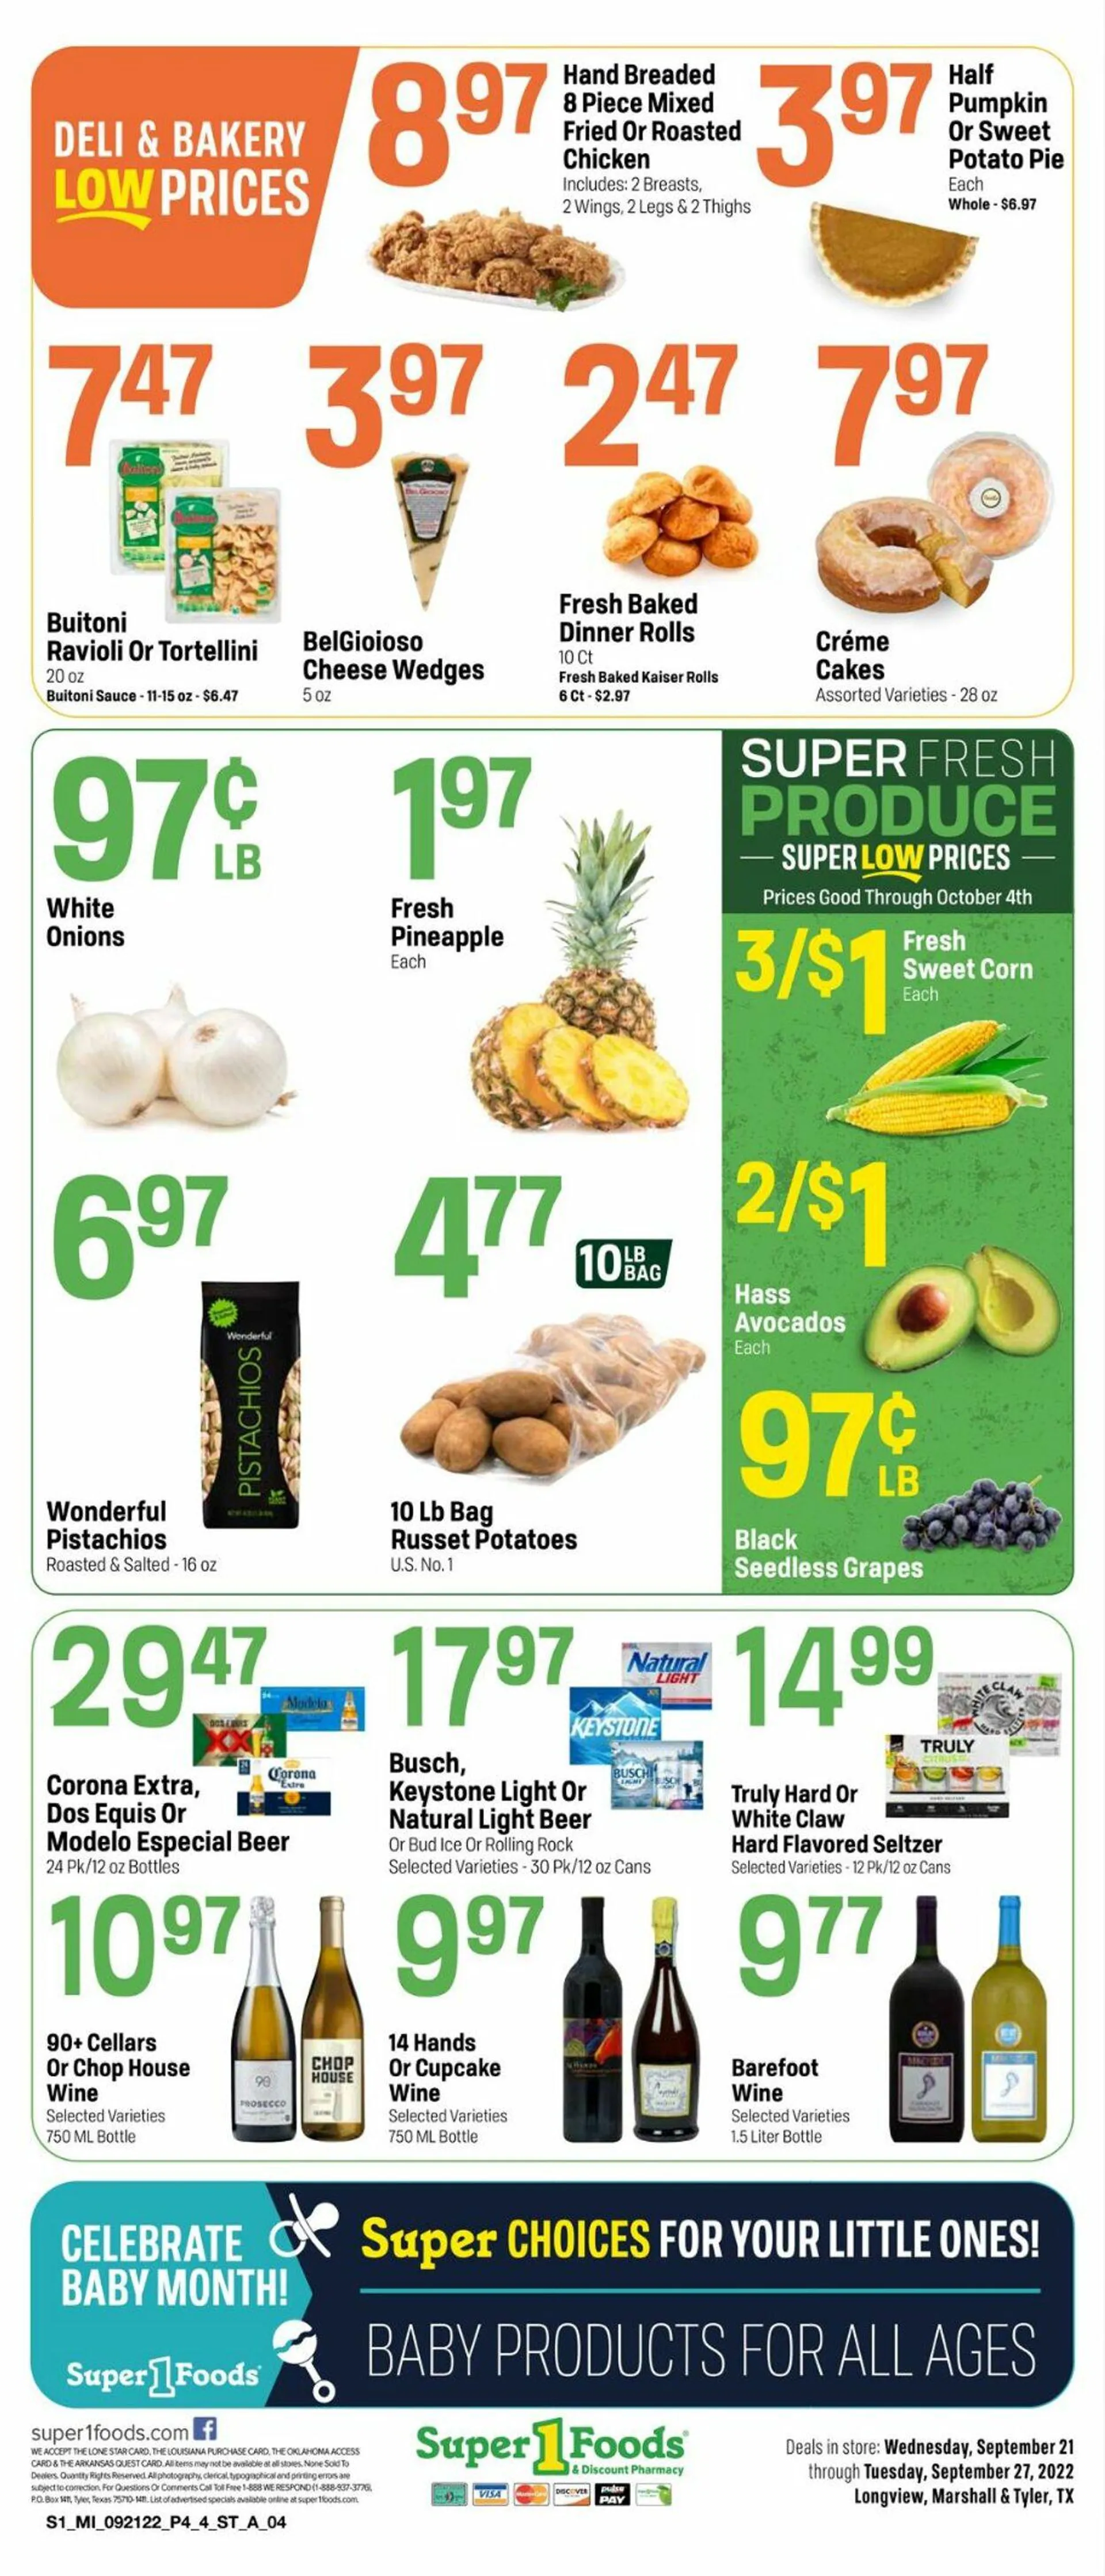 Super 1 Foods Current weekly ad - 4